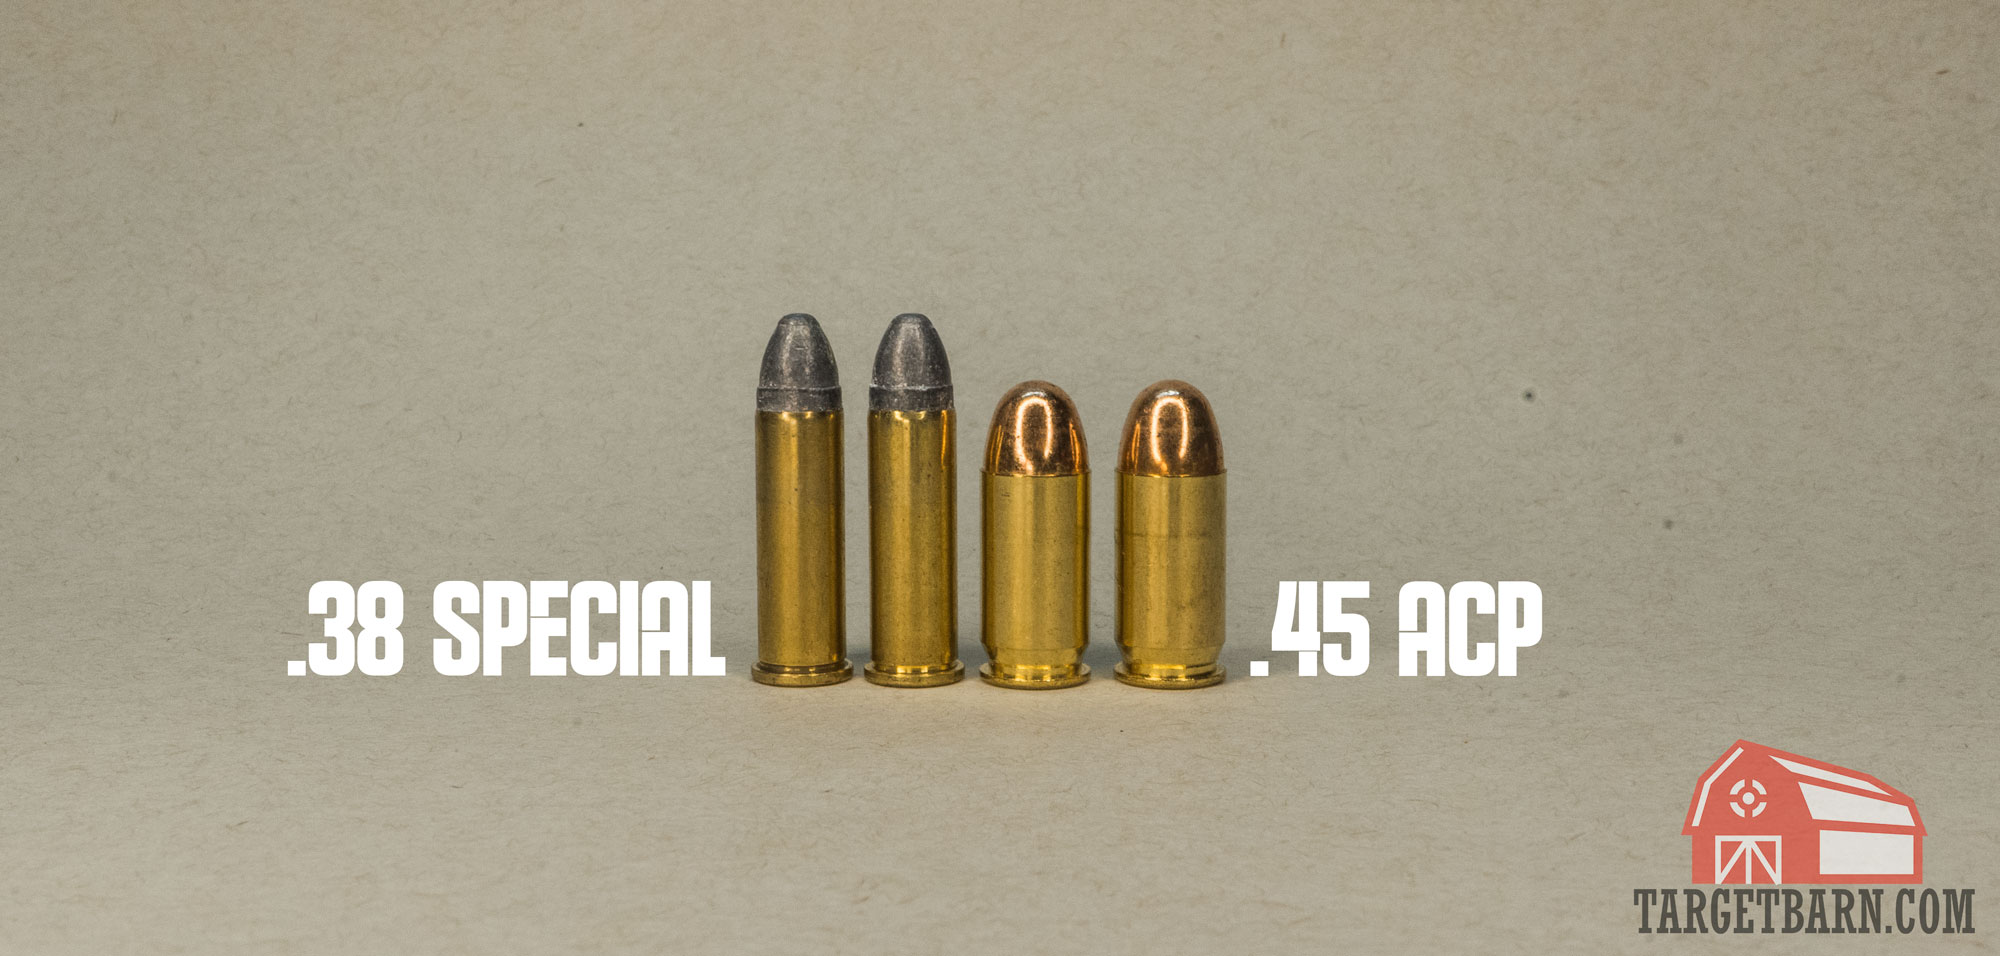 two 38 special rounds next to two 45 acp rounds